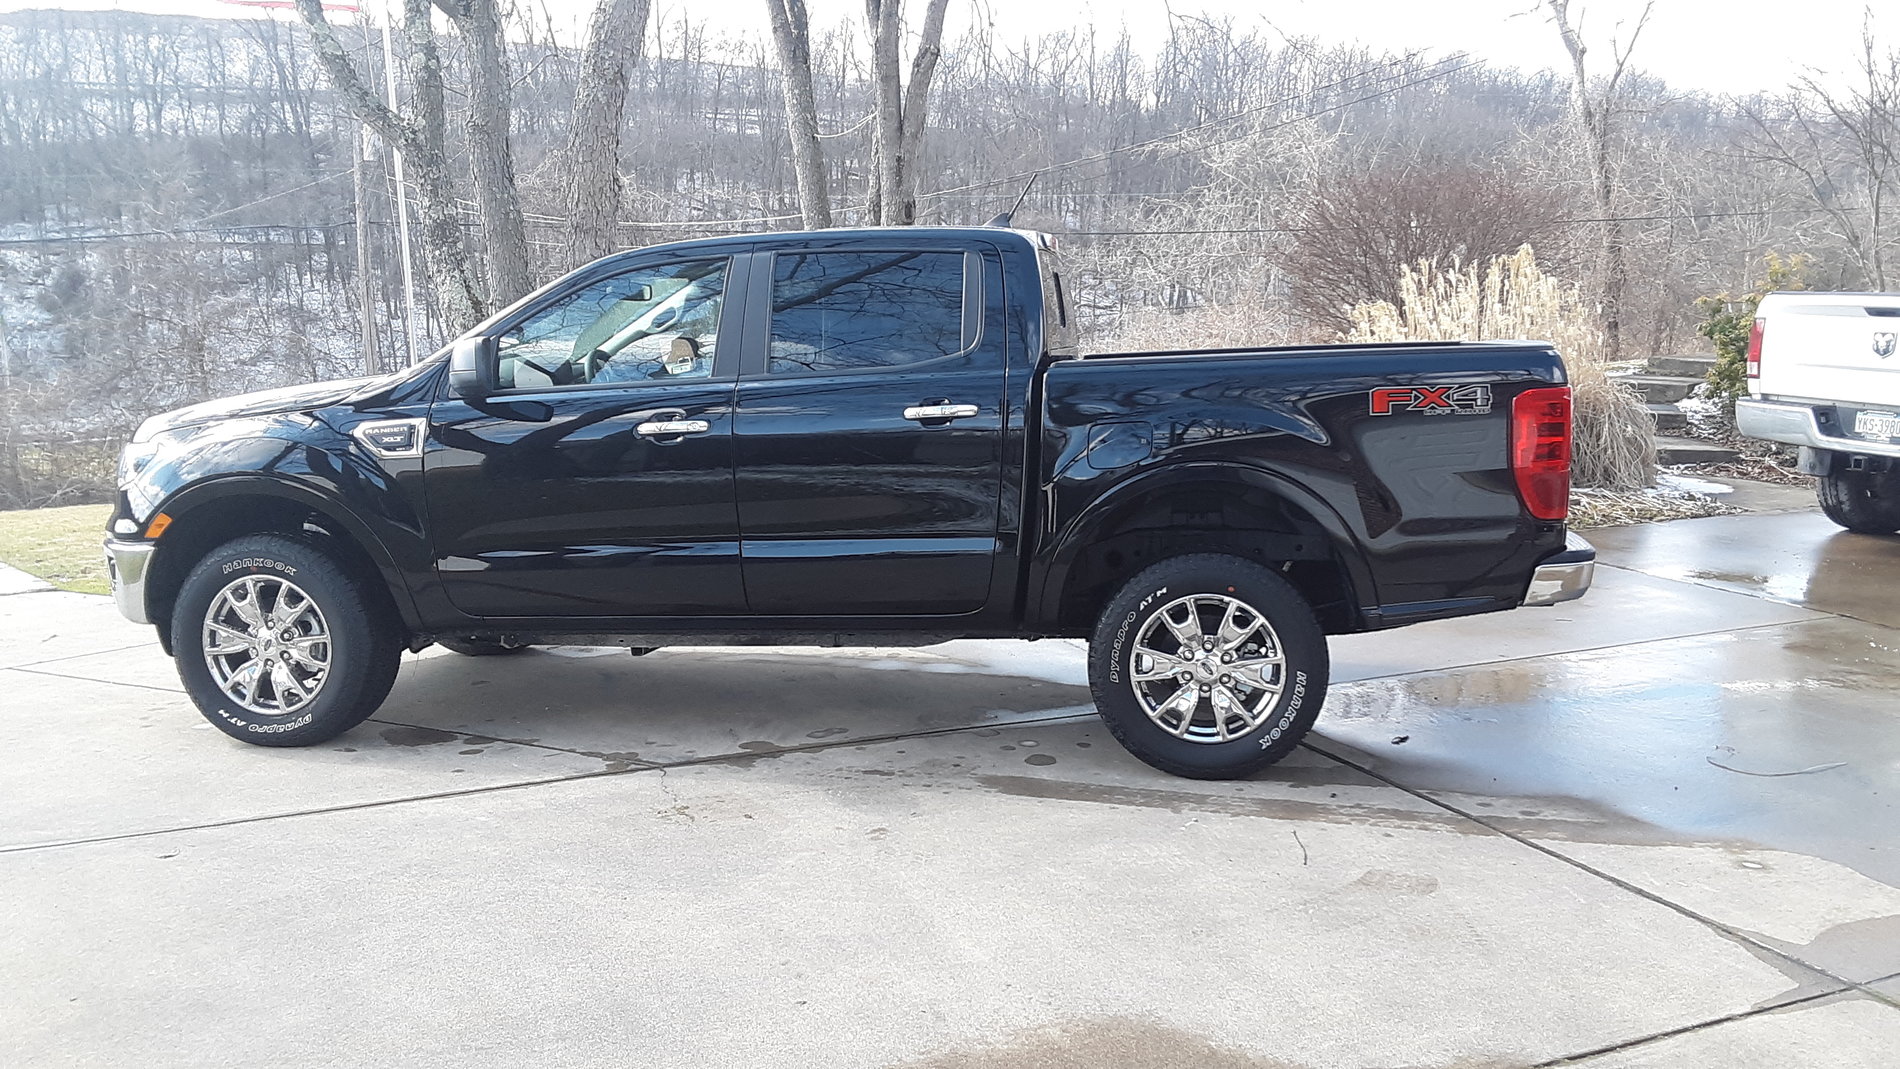 Ford Ranger Lets see your sport package trucks 20200228_115319